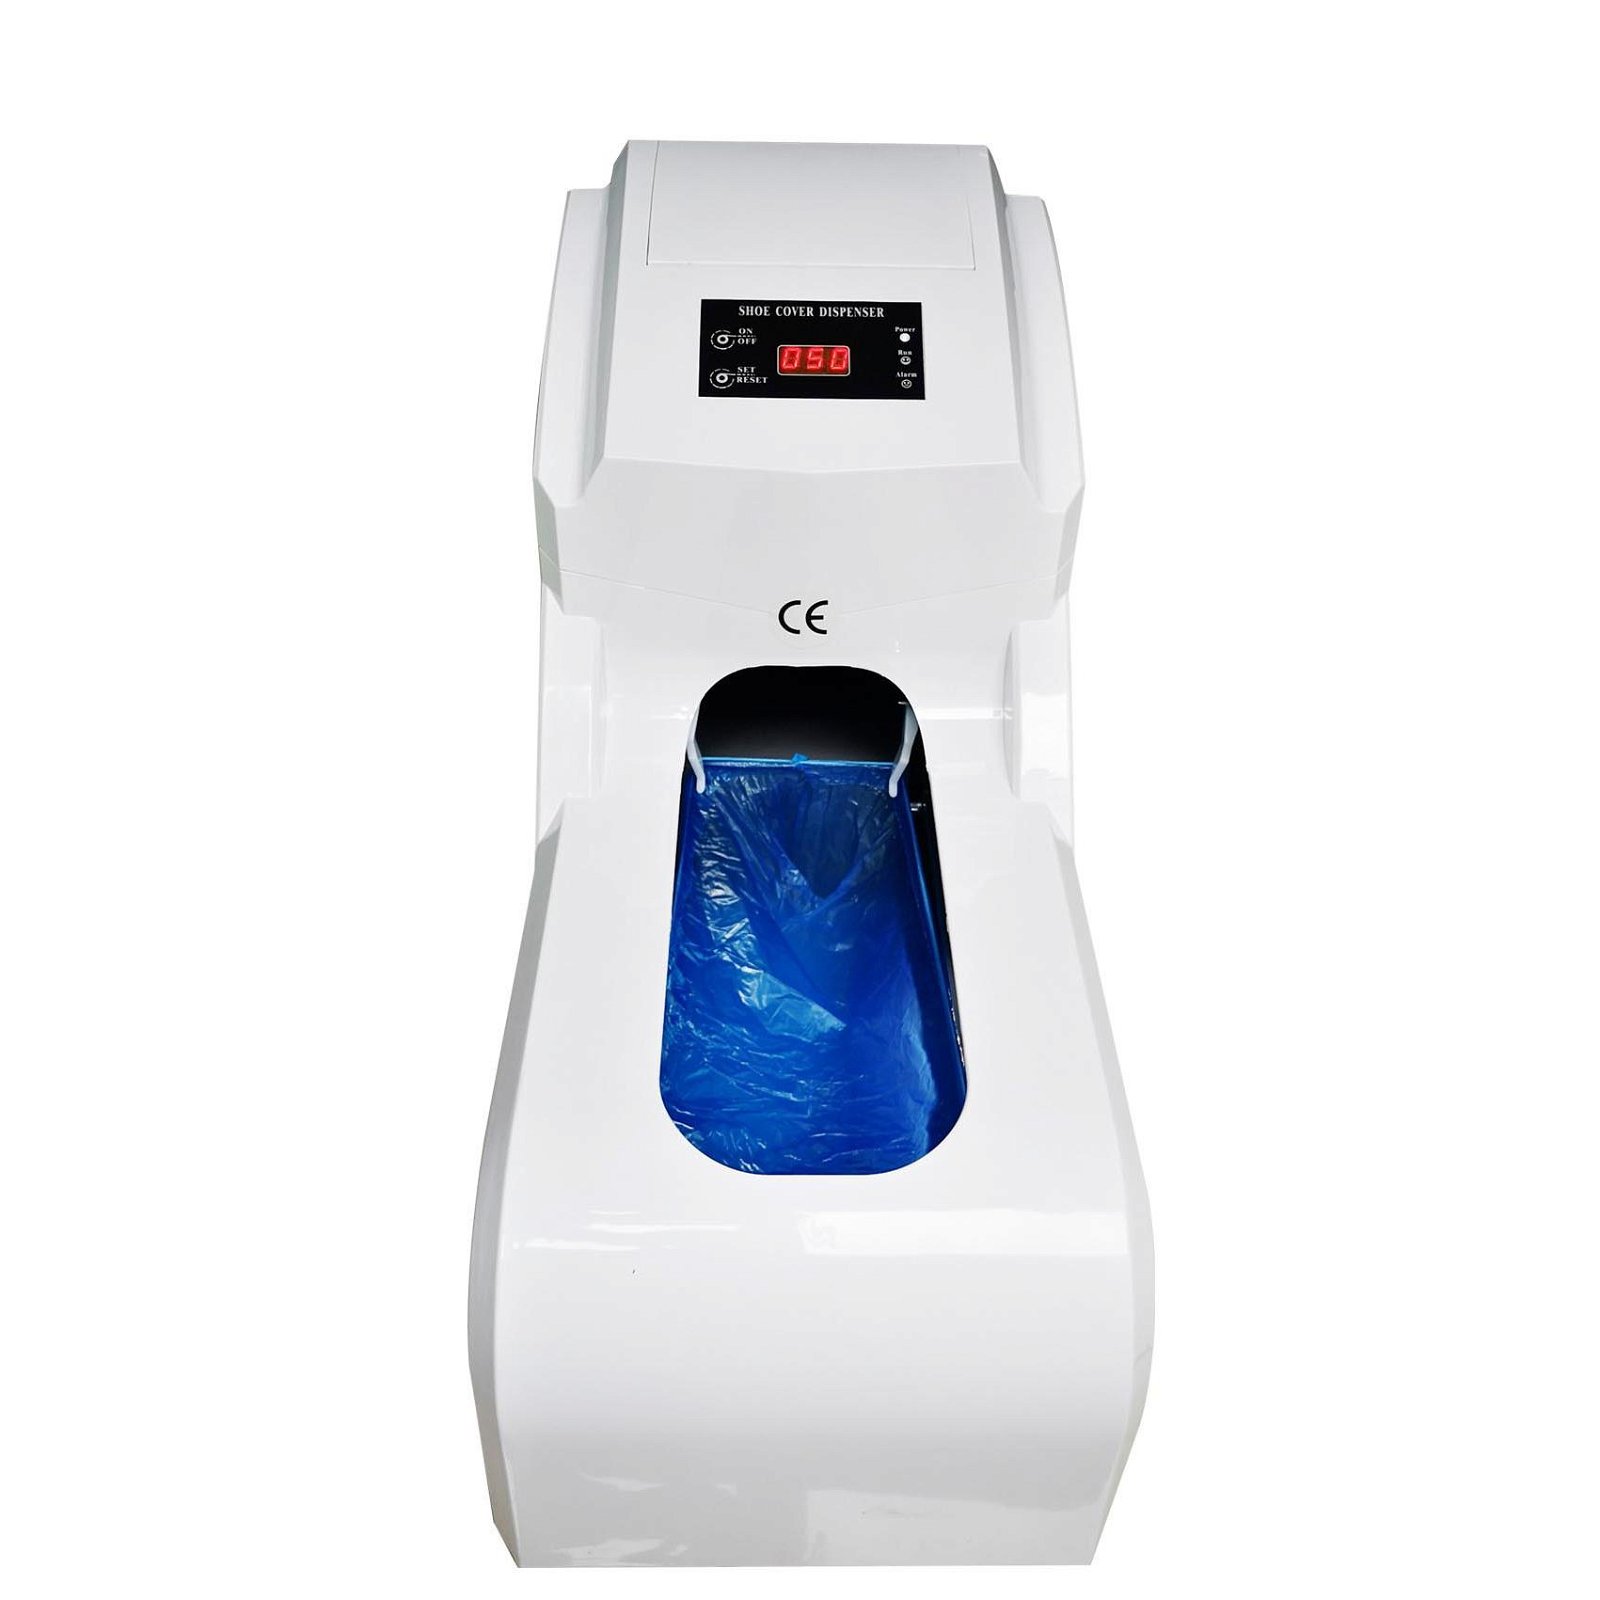 E-SD22 Clean Room Home Business Shoe Covers Dispenser 3